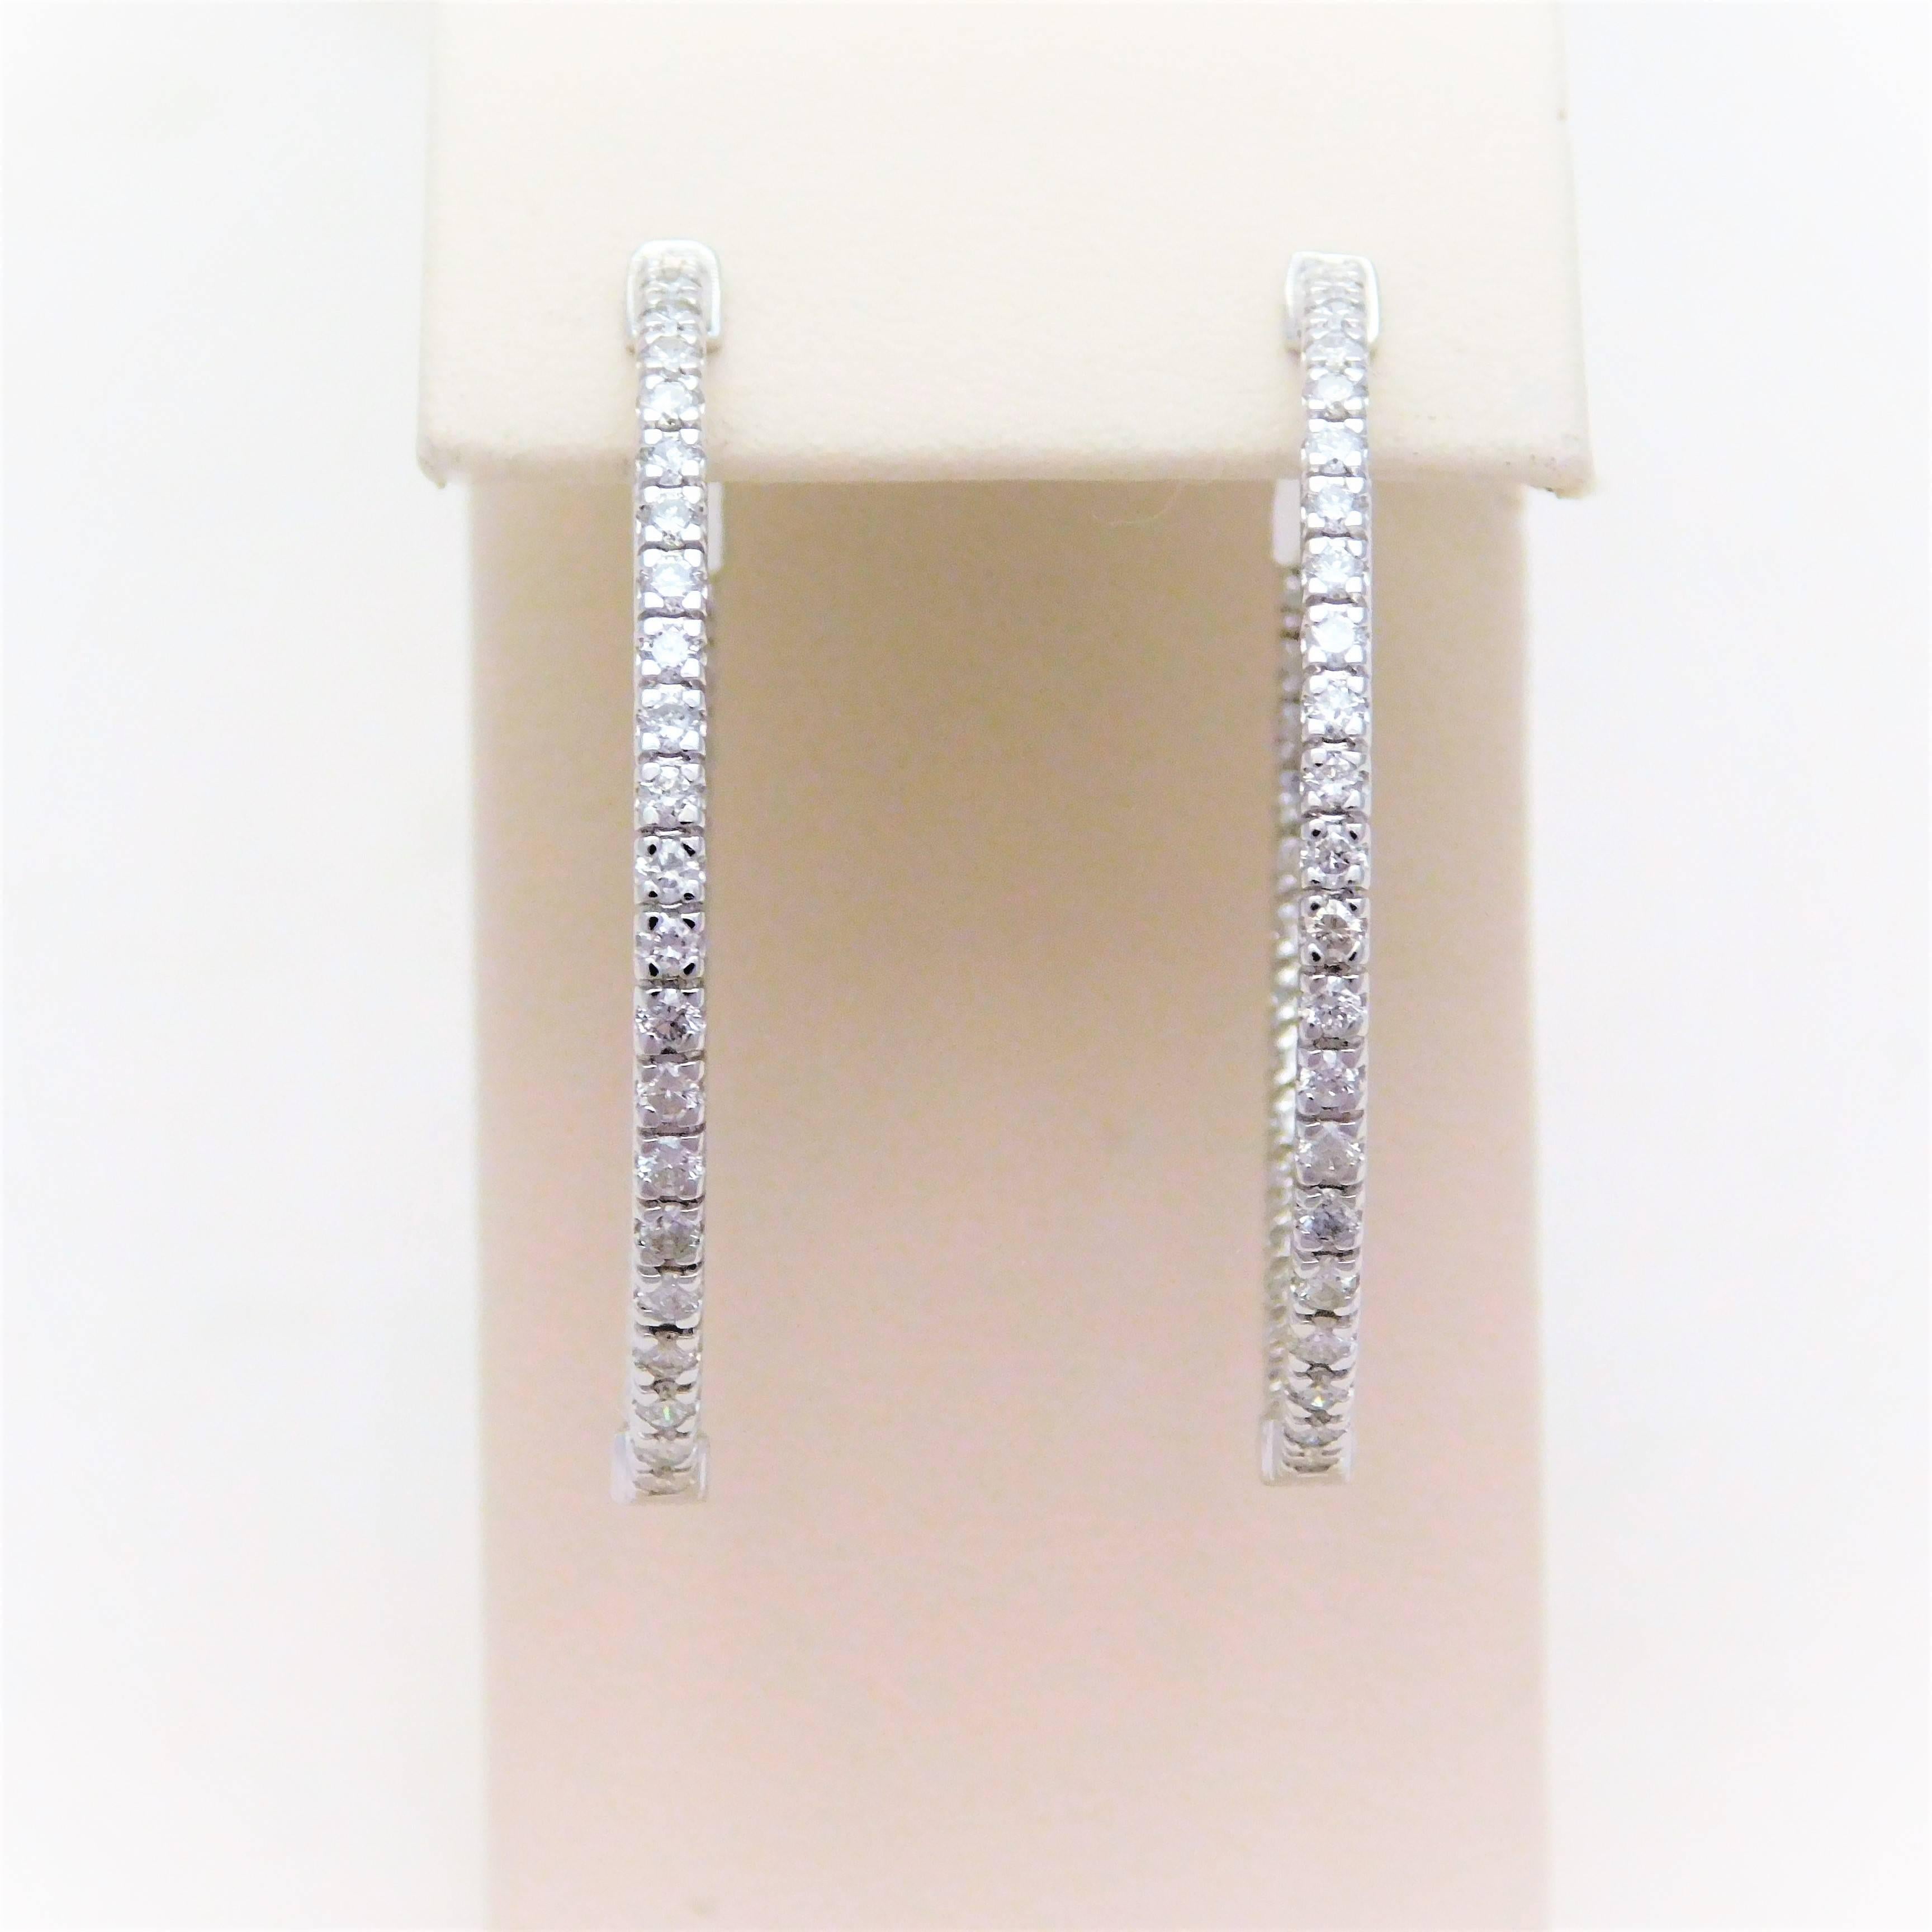 

Hand crafted by one of our master jewelers.  Circa 2017.  This gorgeous set of diamond hoop earrings have been hand crafted in solid 14k white gold.  They are masterfully jeweled with 74 bright and sparkling round-brilliant cut diamonds totaling a